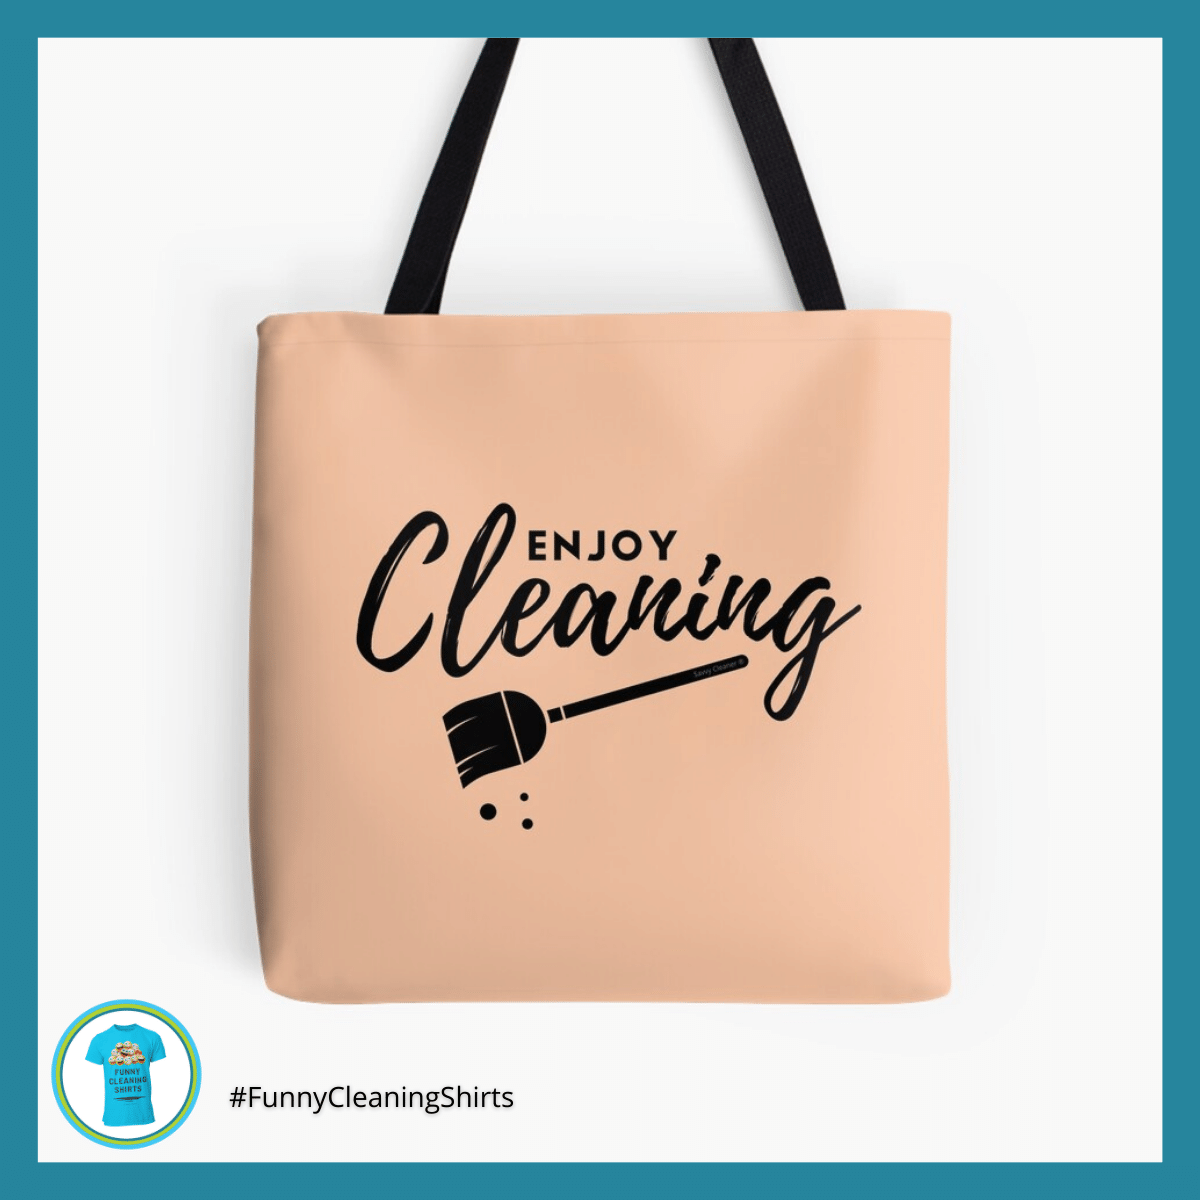 Enjoy Cleaning Savvy Cleaner Funny Cleaning Shirts Tote